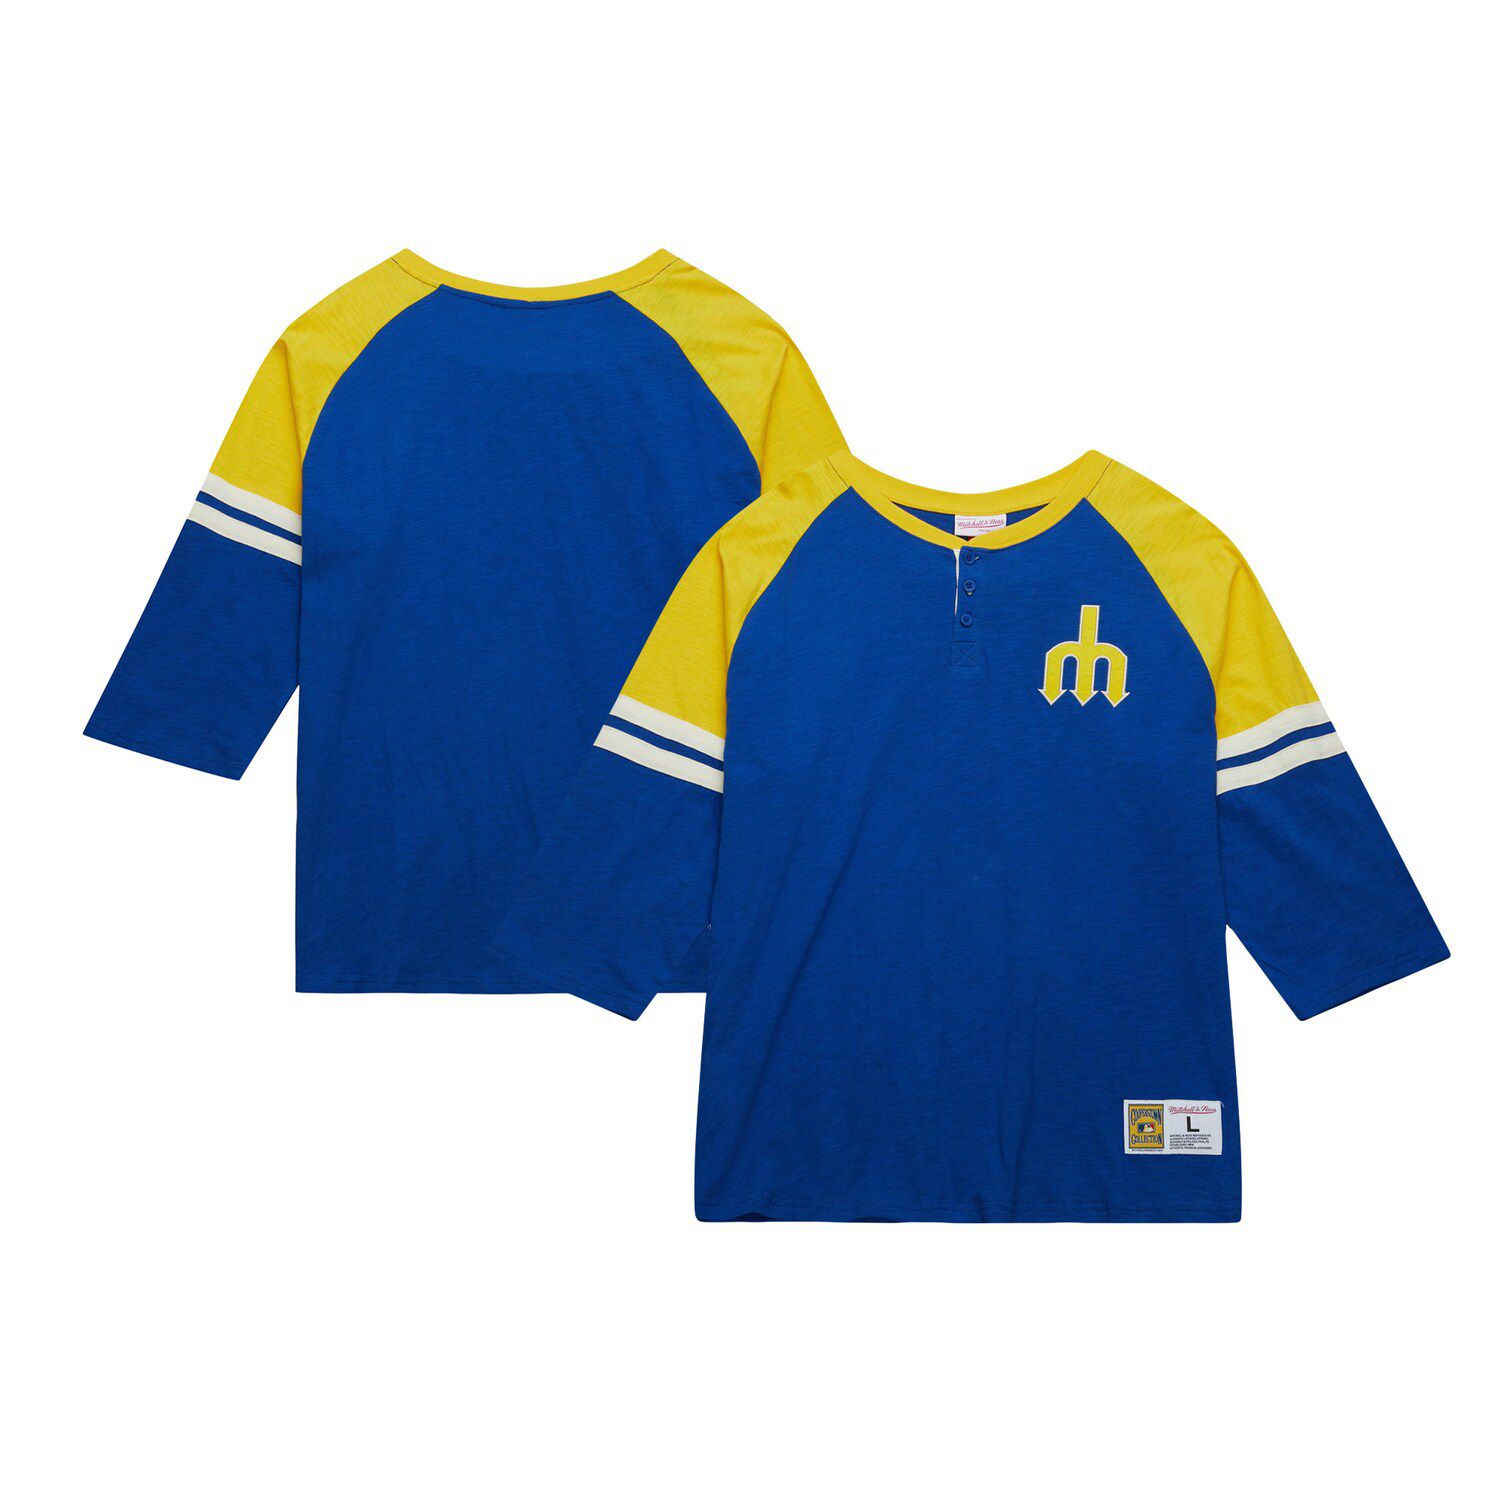 mariners cooperstown jersey